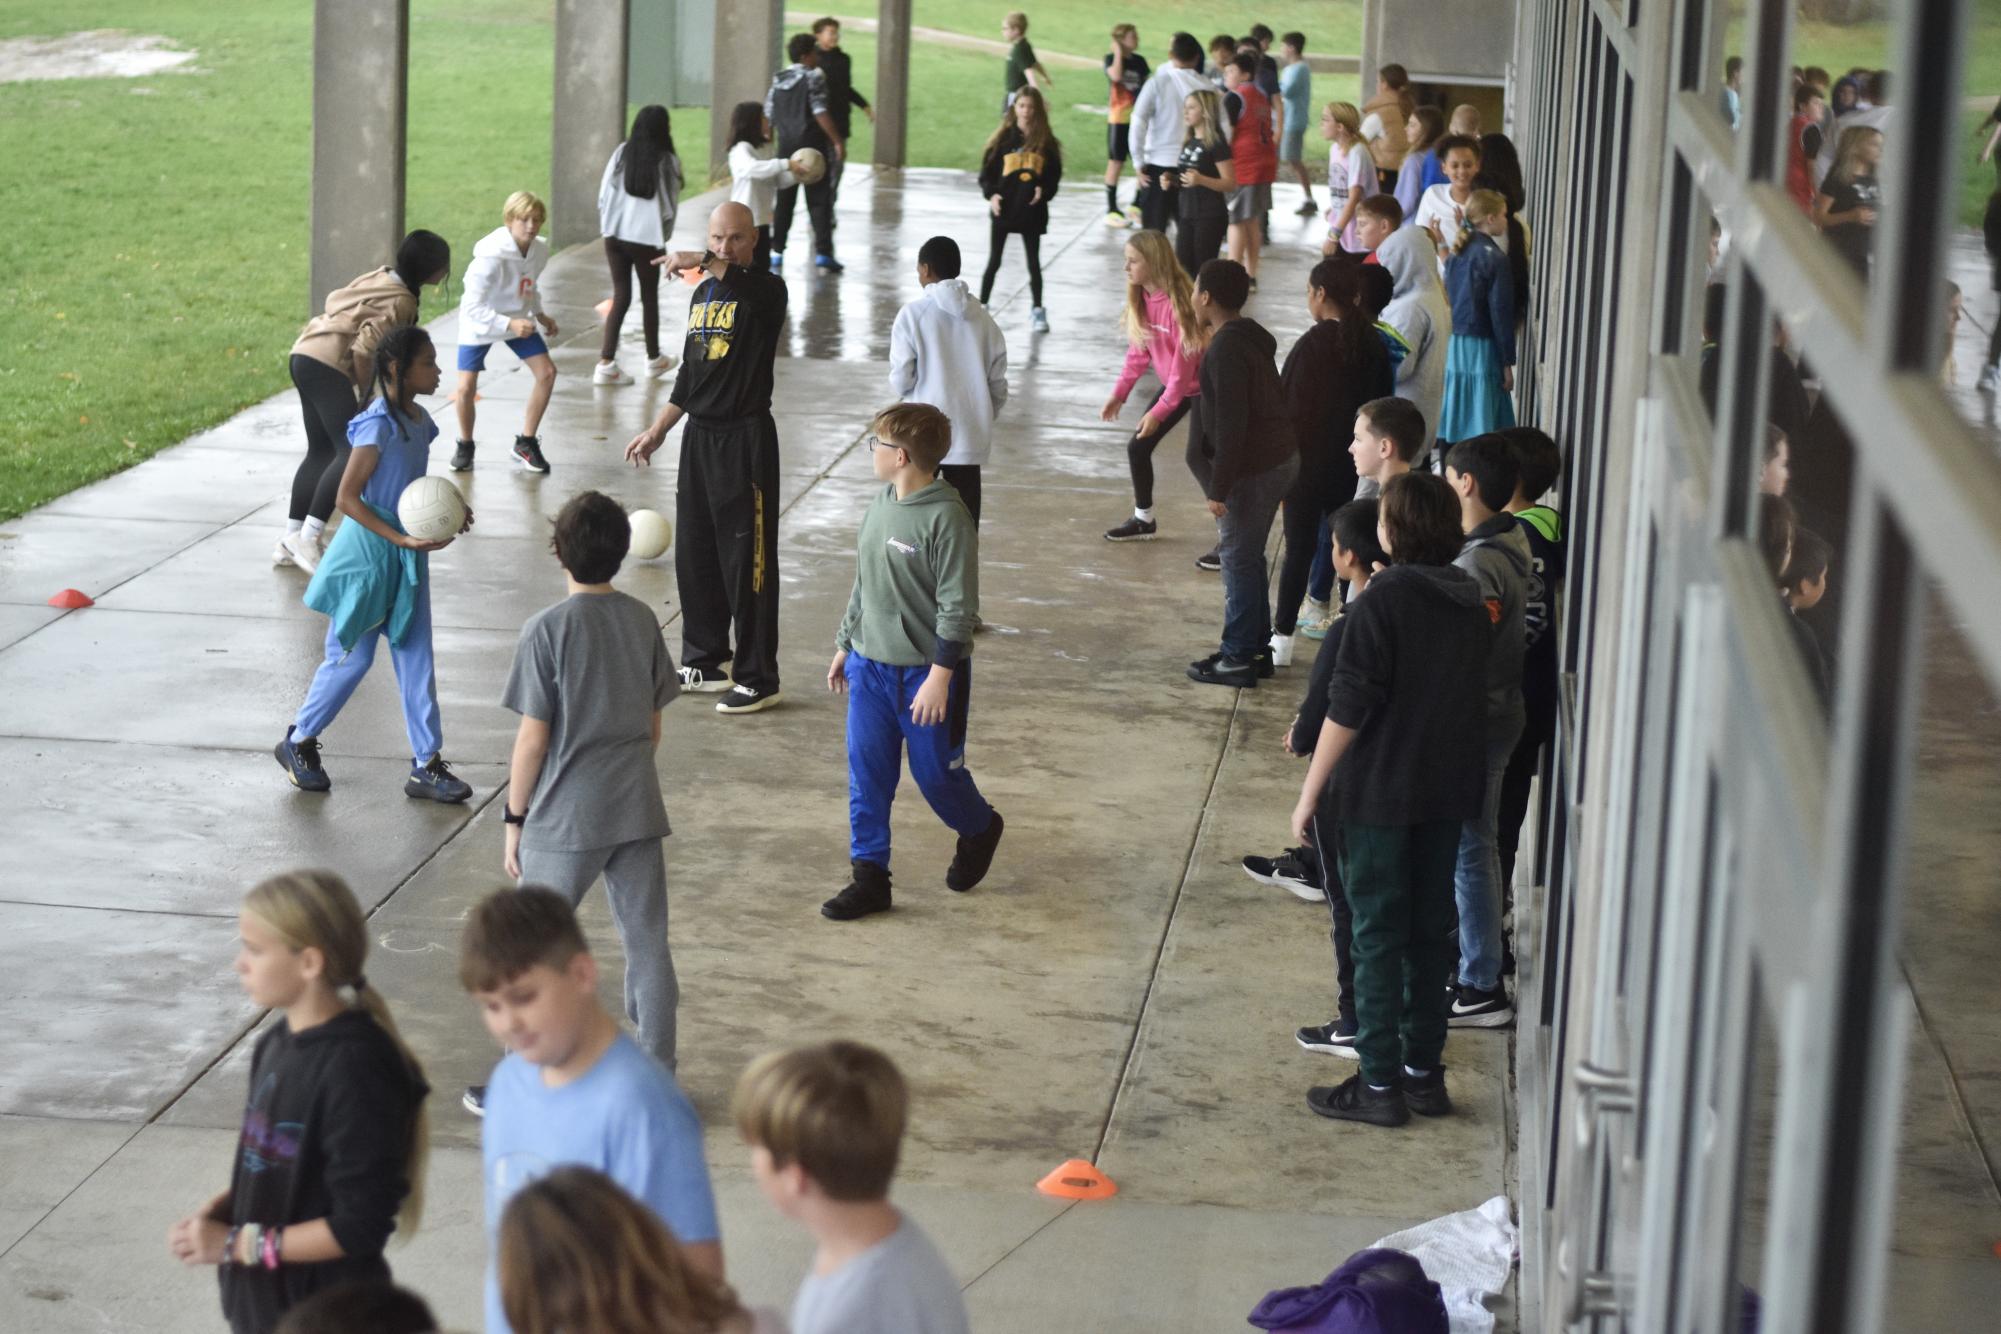 Students milling around as Taft gym classes held on the back patio.